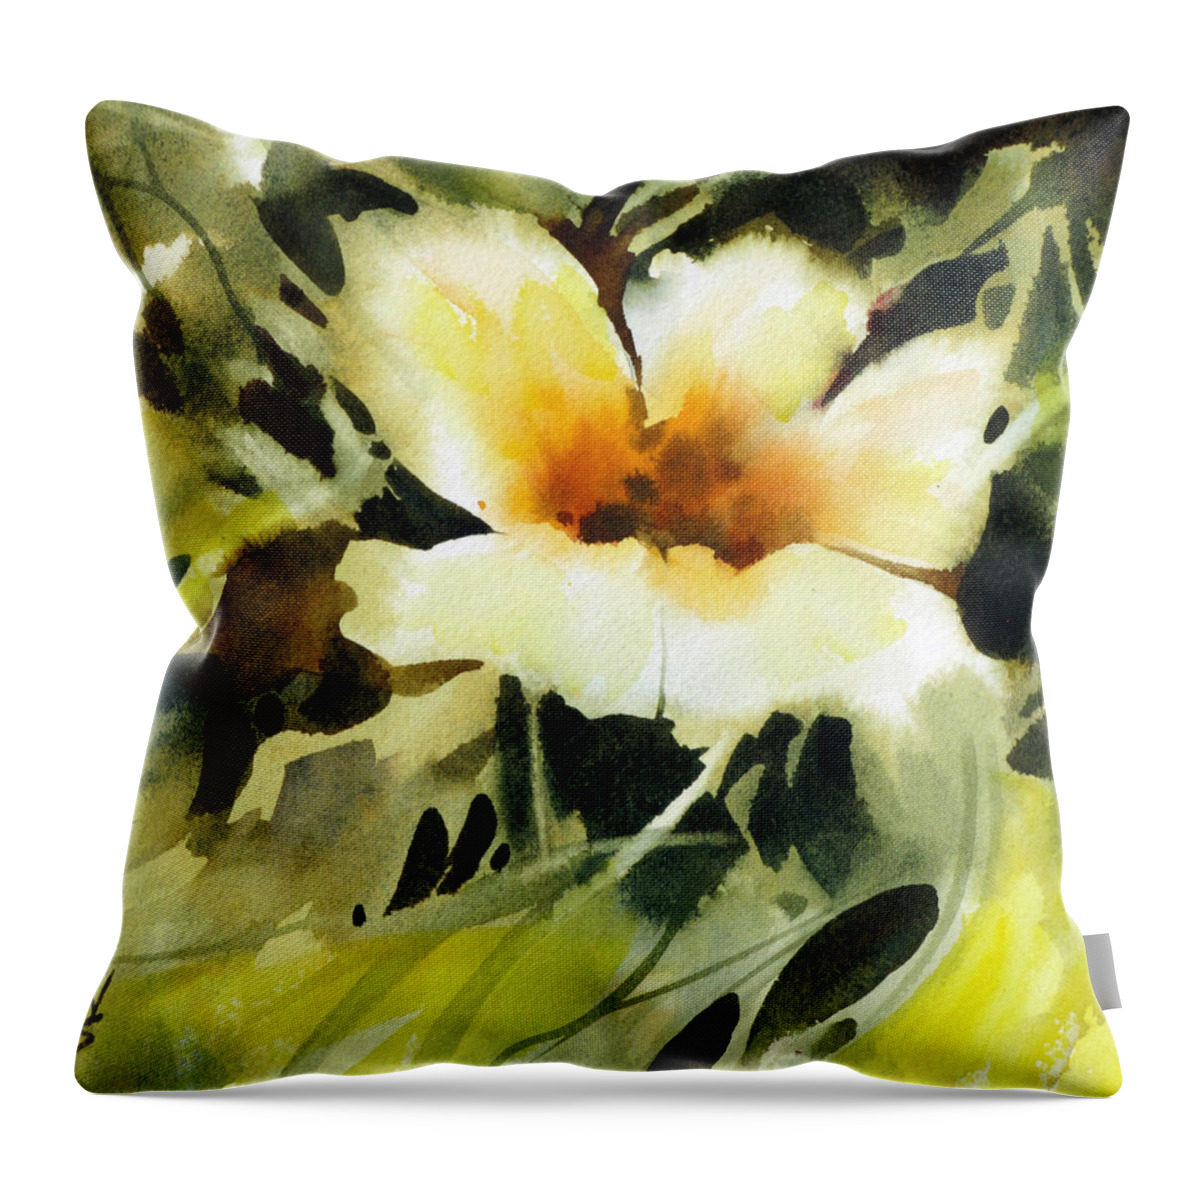 Floral Throw Pillow featuring the painting Glimpse by Rae Andrews